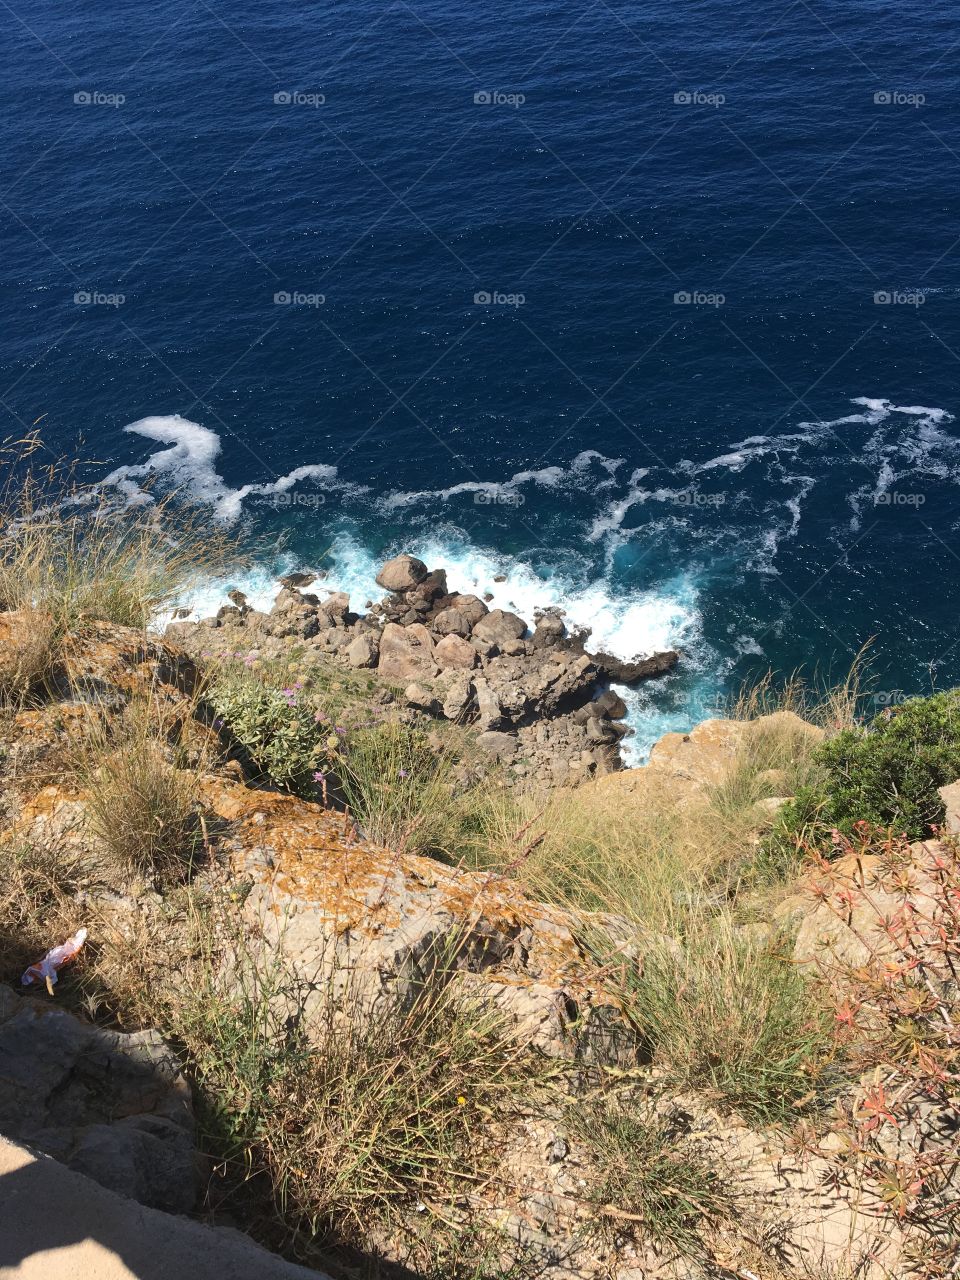 Just looking down at where the waves of the sea is hitting the land. Mallorca east coast. 